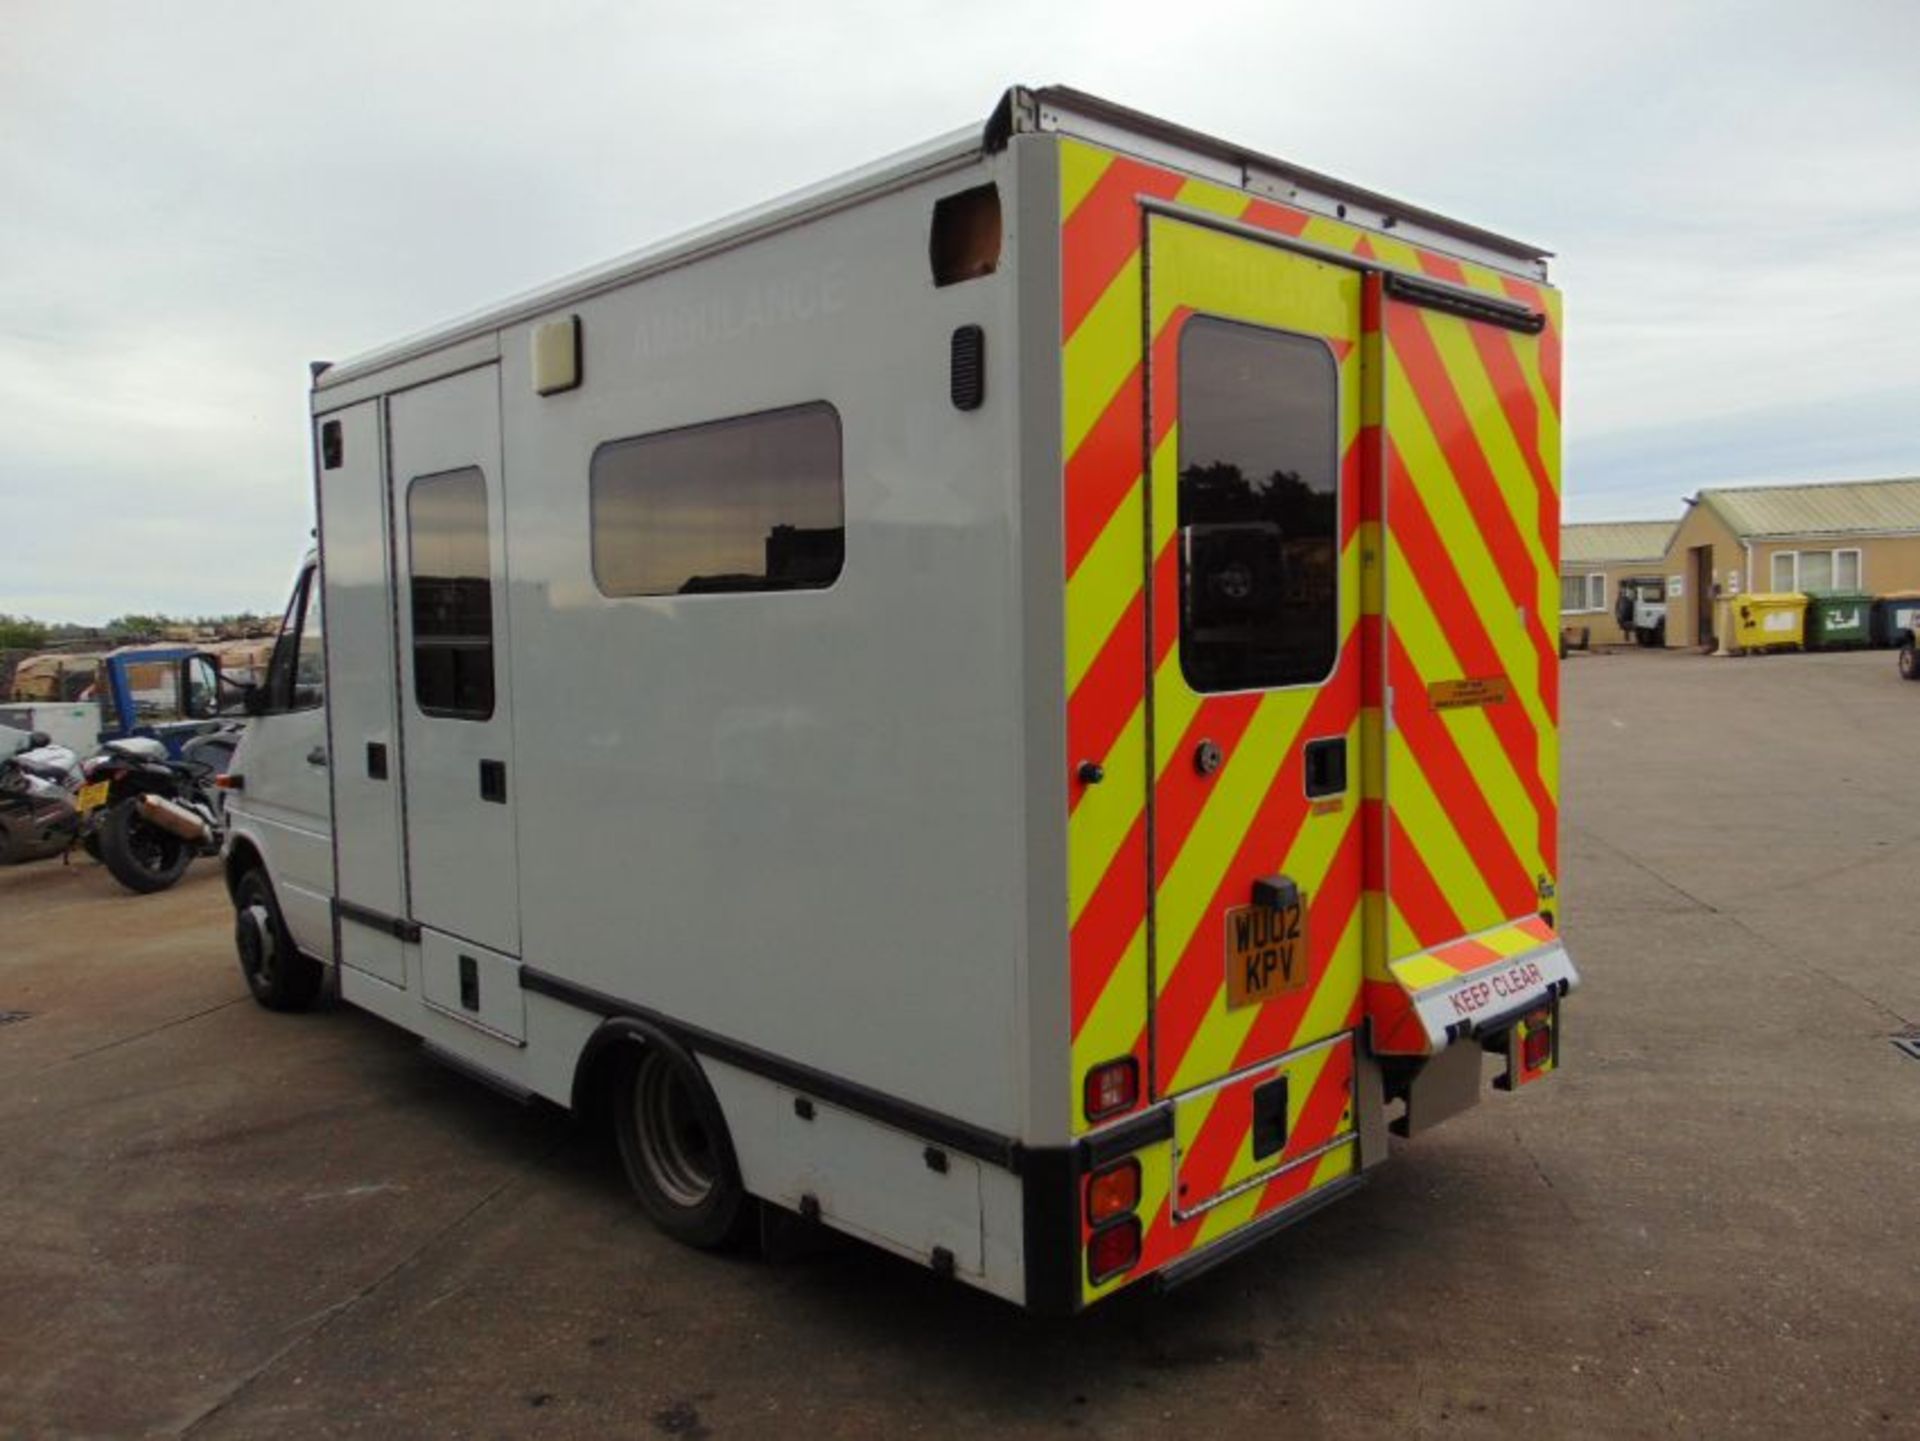 Recent Released by Atomic Weapons Establishment a 2002 Mercedes 418 CDi Ambulance ONLY 32,825 Miles! - Image 8 of 34